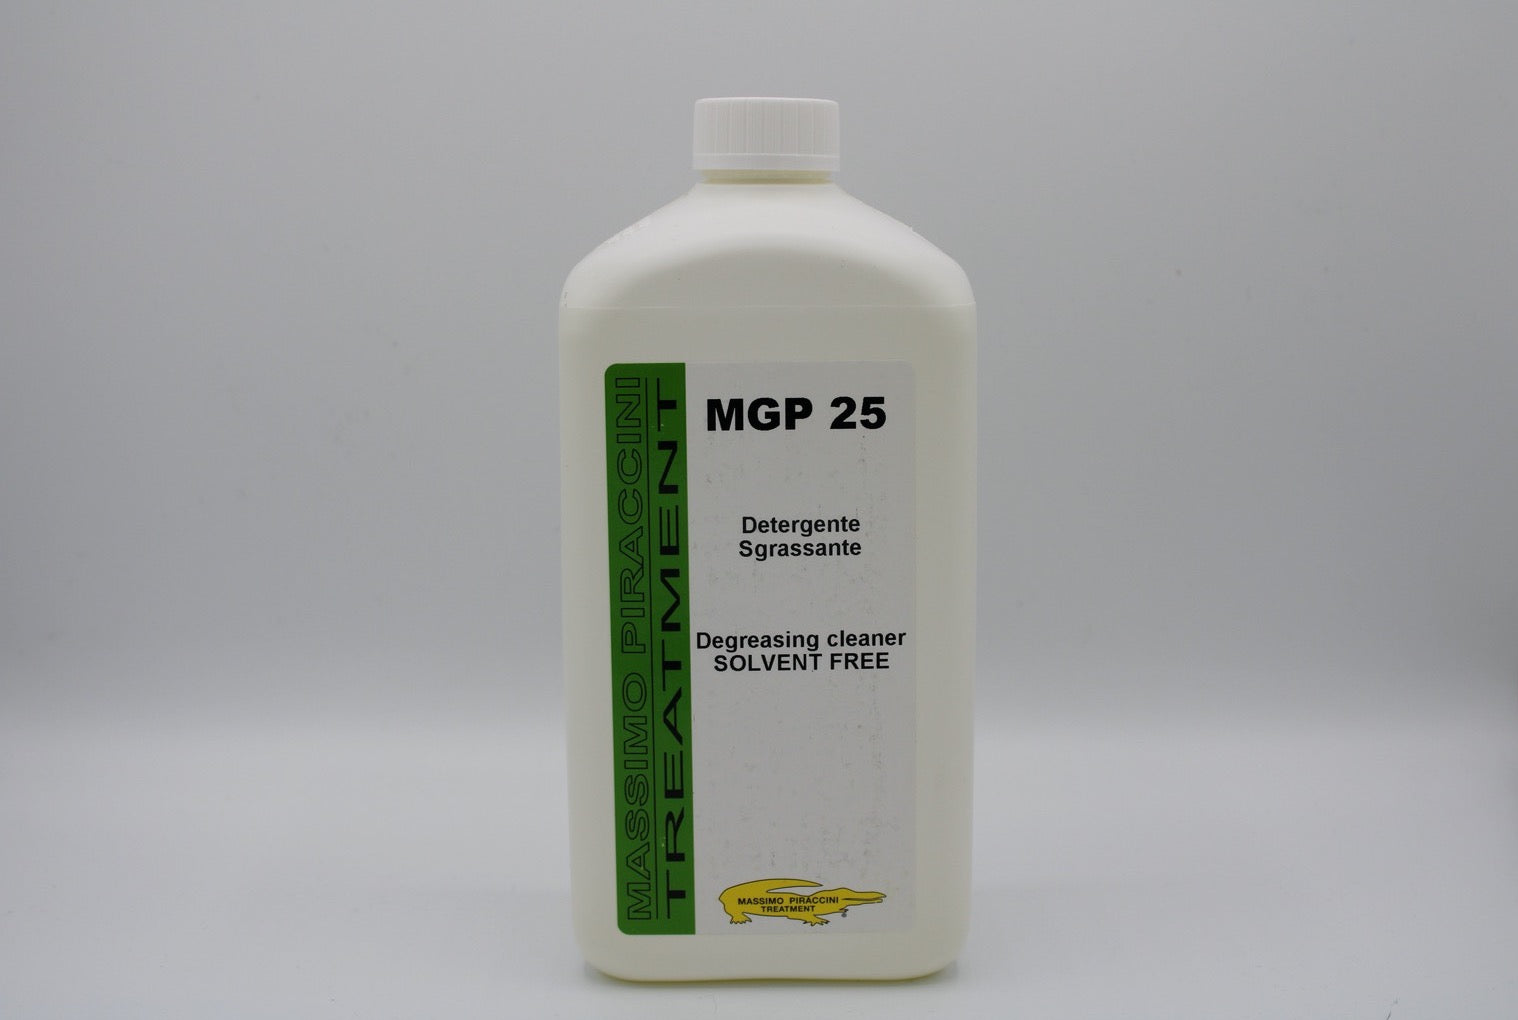 MGP 25 - Degreasing cleaner for ordinary or maintenance cleaning. SOLVENT AND ACID FREE